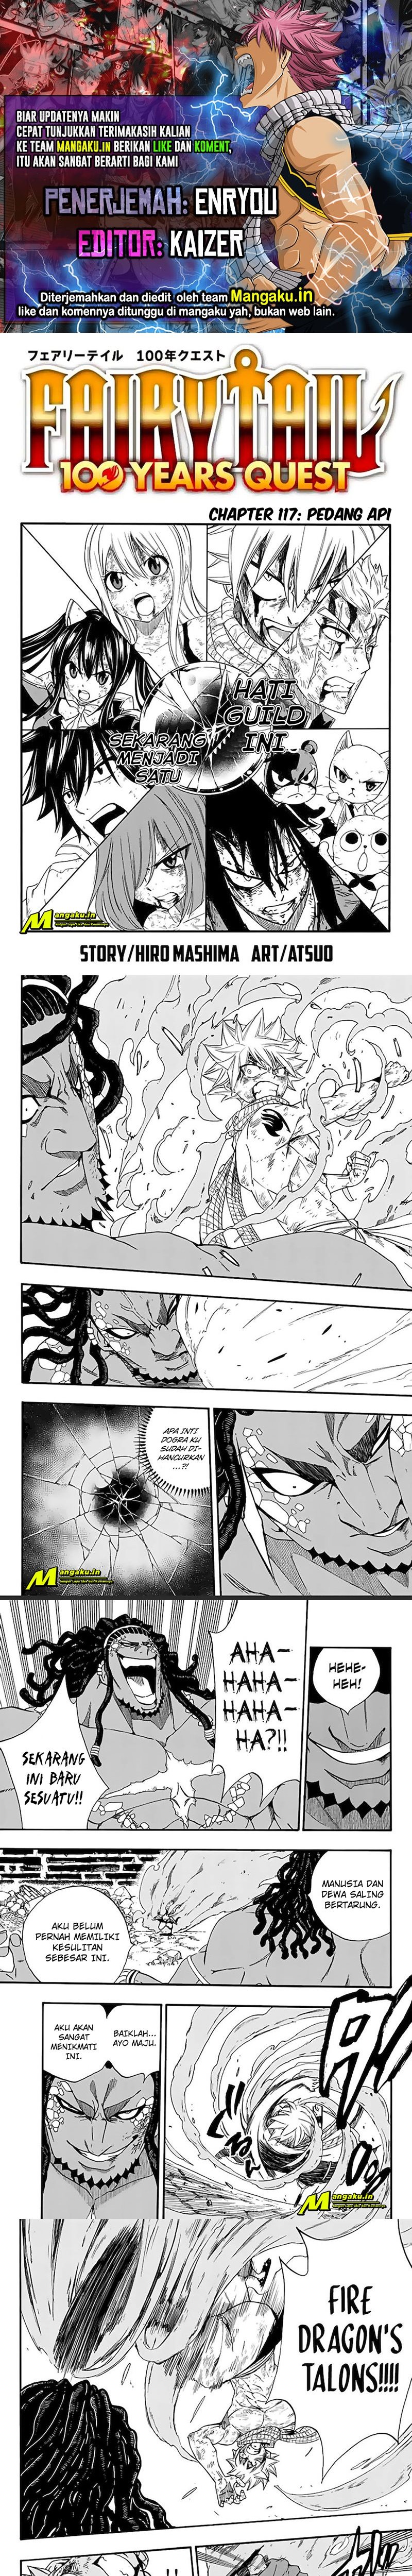 Fairy Tail: 100 Years Quest Chapter 117